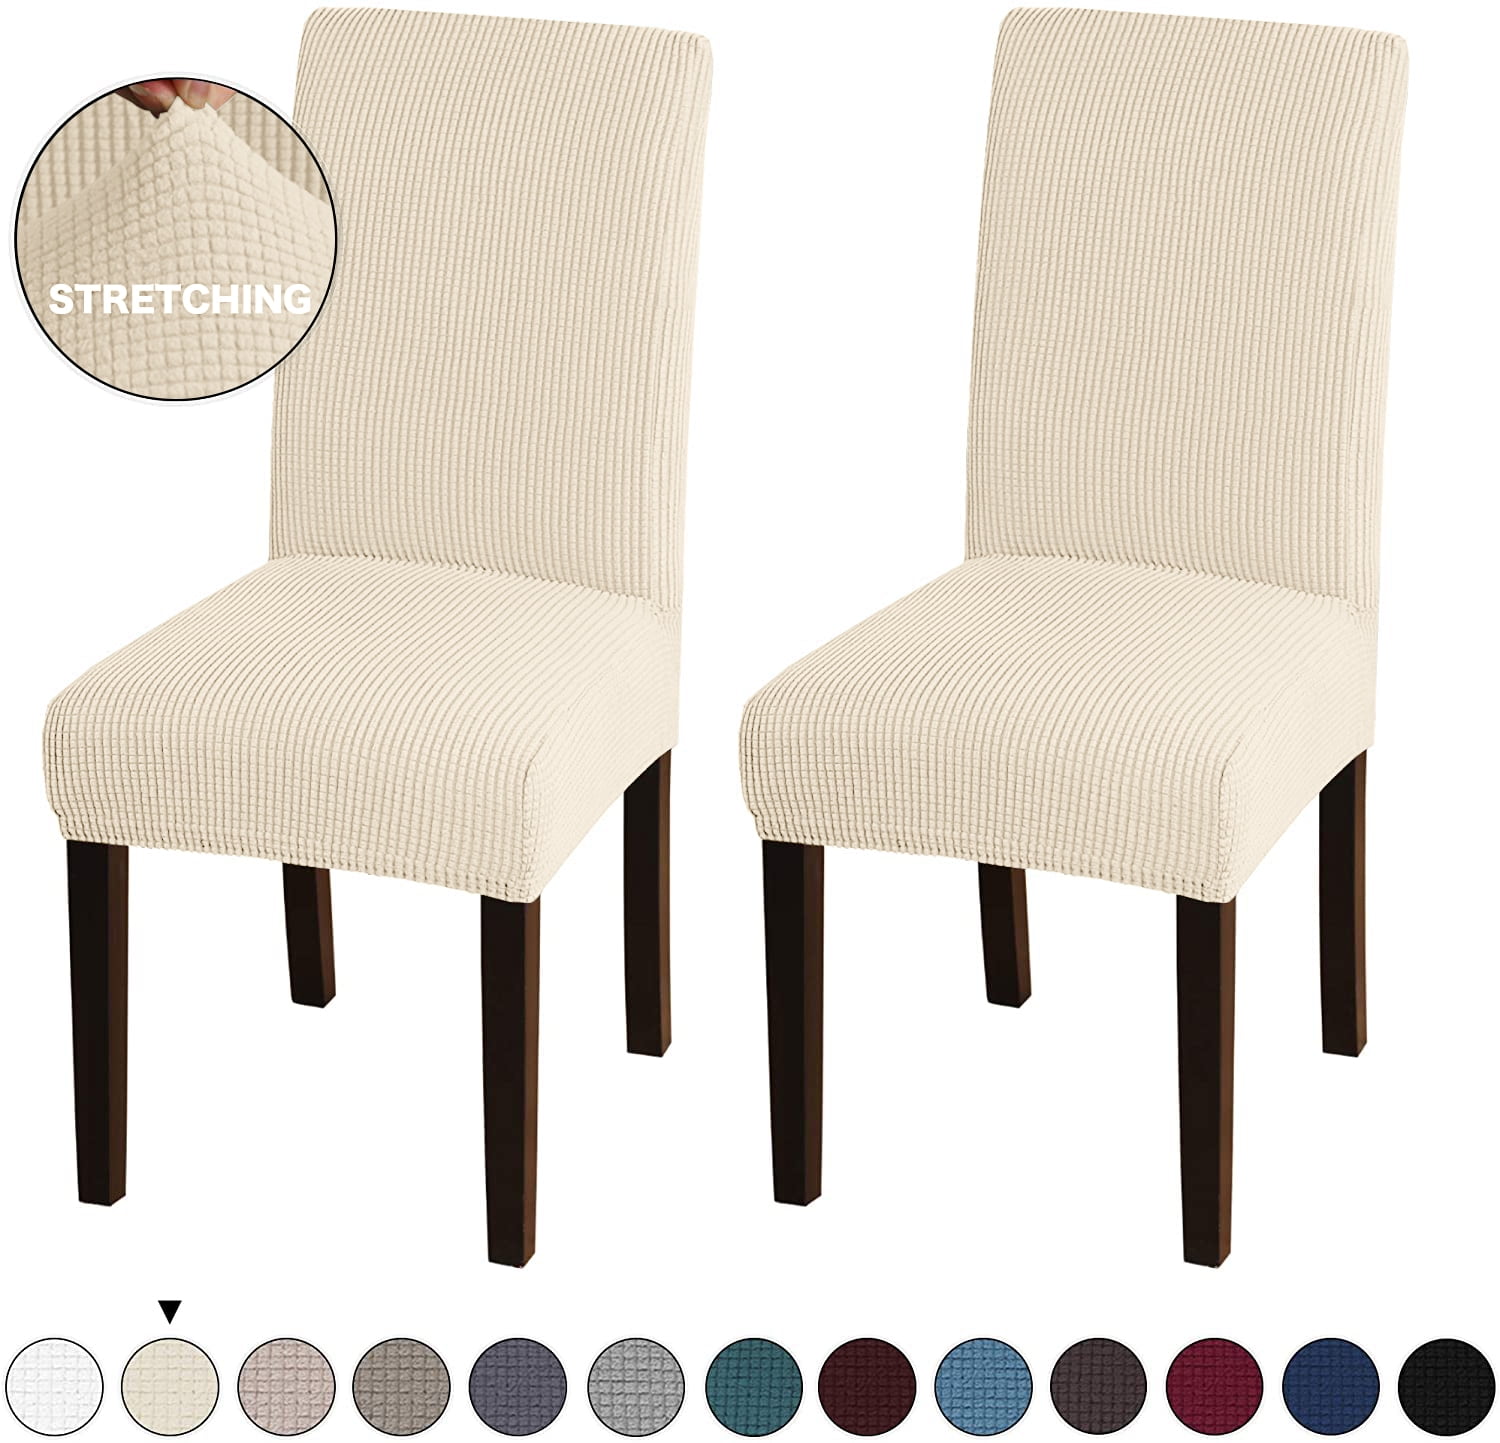 Lnkoo 2 Pack Dining Room Chair, Dining Room Chair Slip Covers